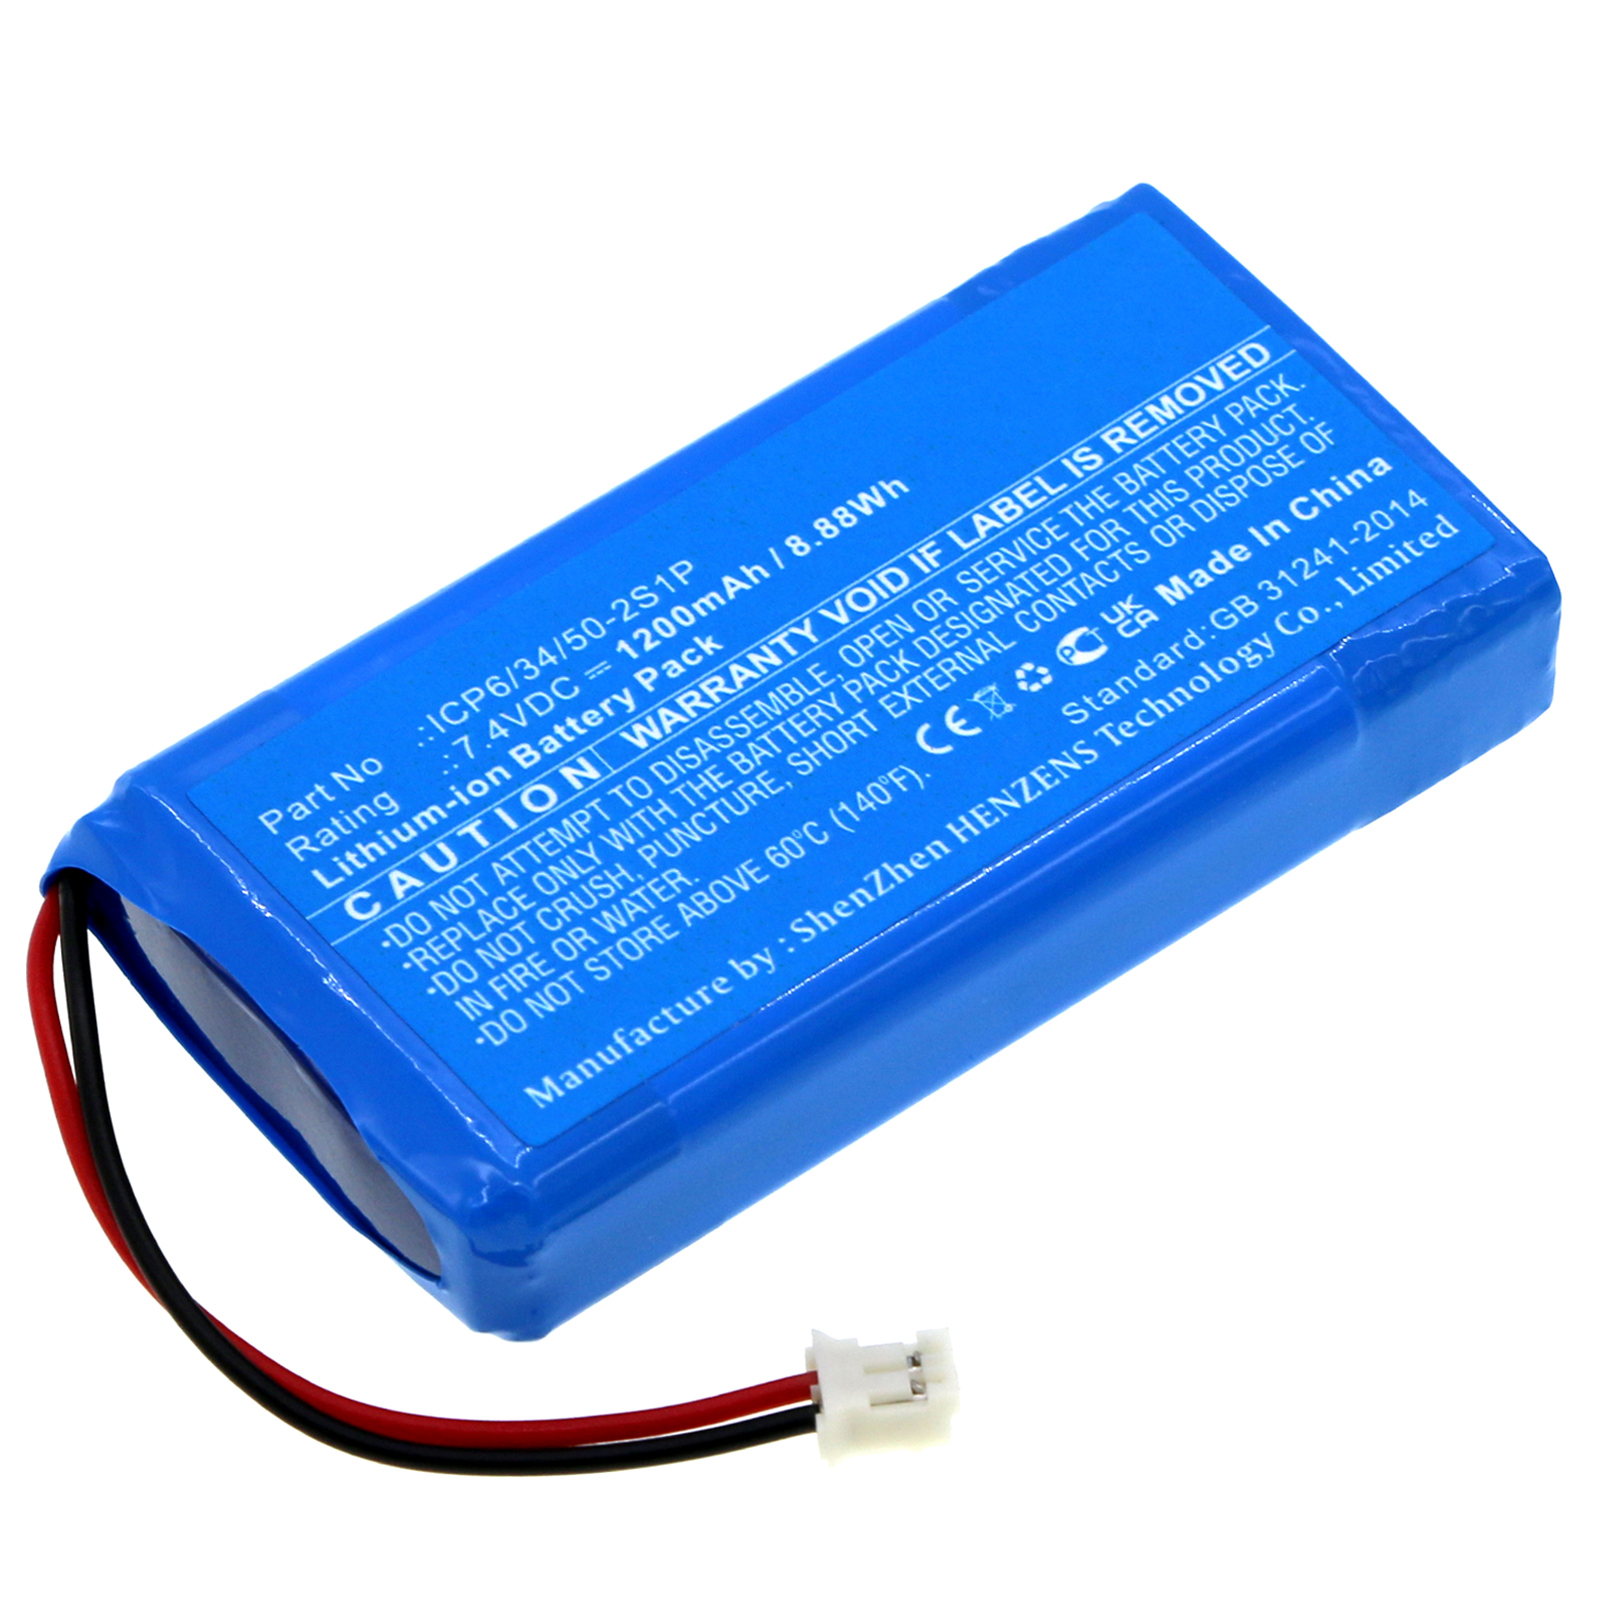 Synergy Digital Amplifier Battery, Compatible with Chord ICP6/34/50-2S1P Amplifier Battery (Li-ion, 7.4V, 1200mAh)